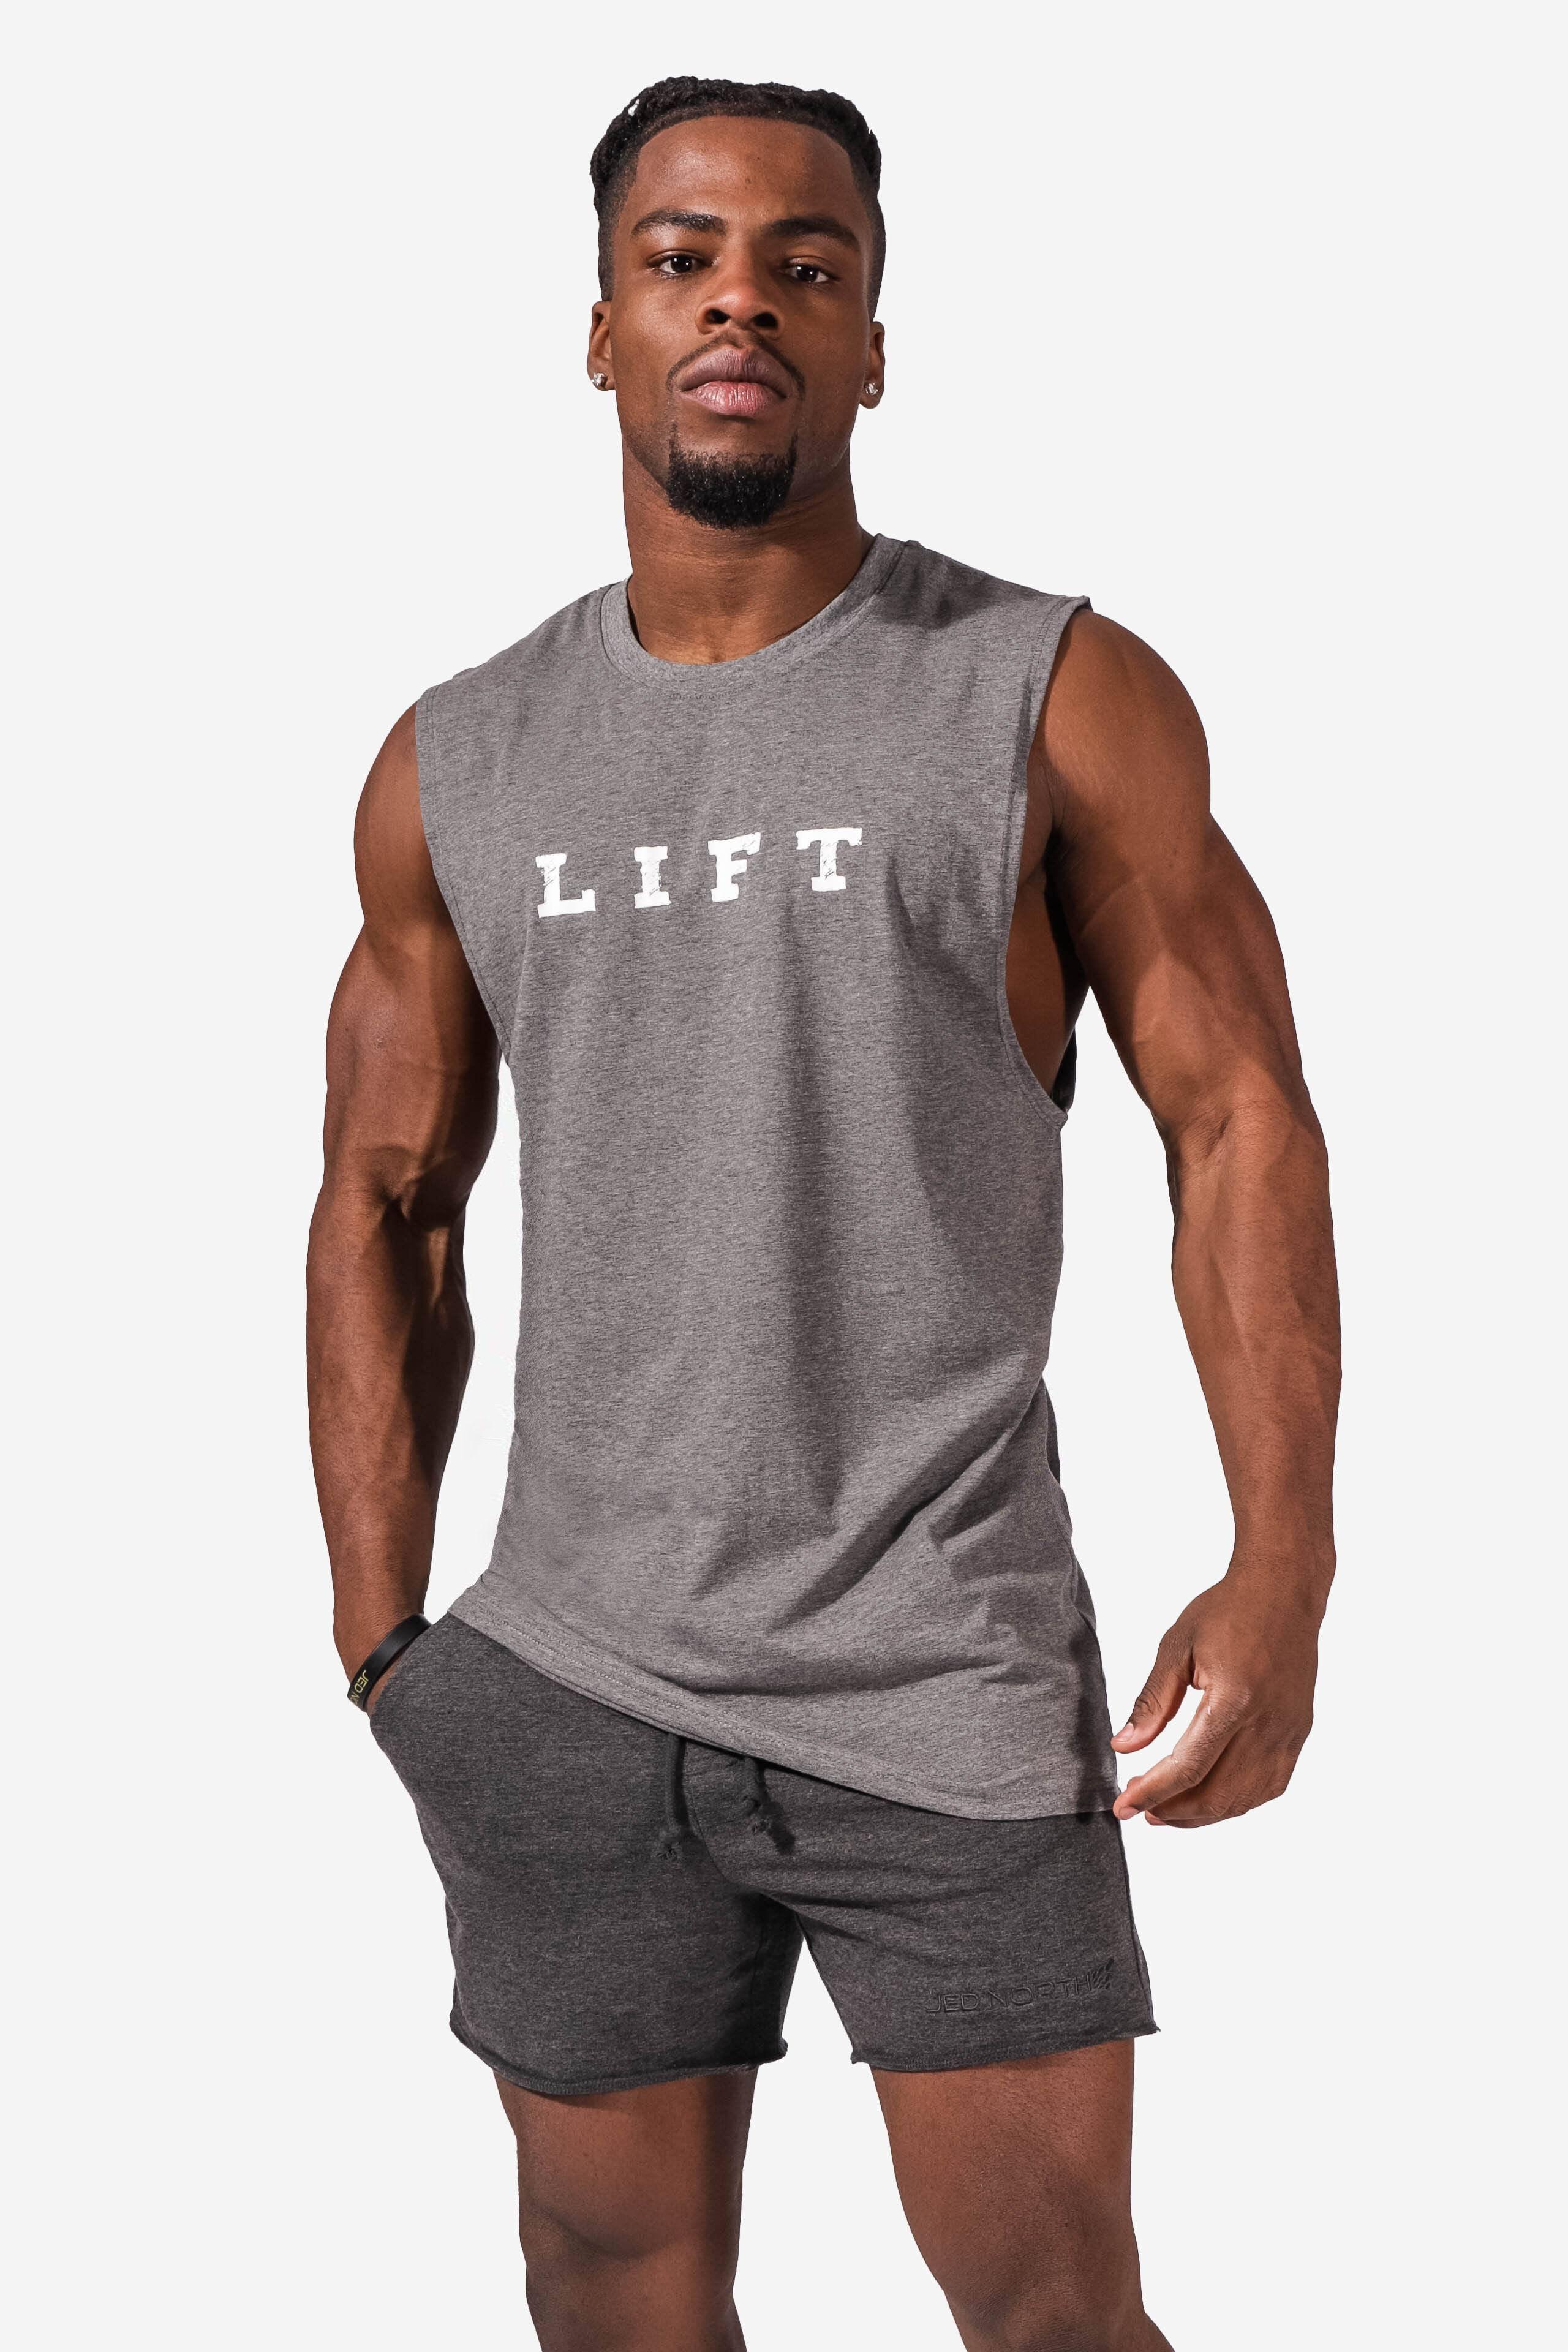 Lingt Chic Men's Gym Body Building Sports Running Workout Training Exercise Fitness Tees Shirt